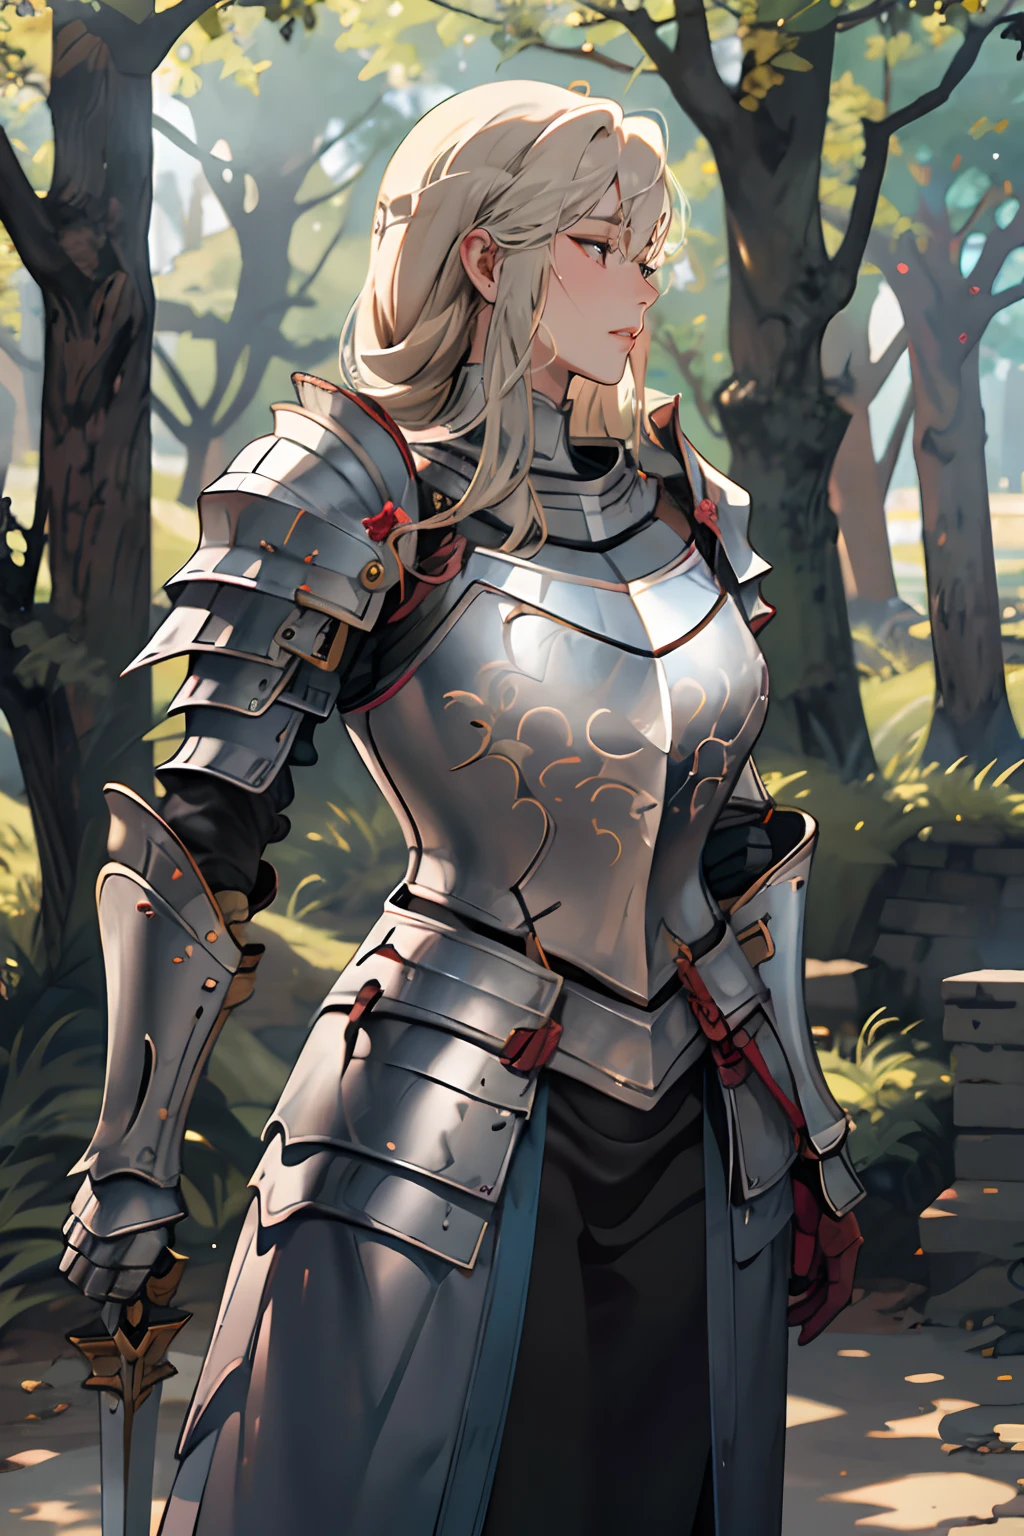 Women in Their 20s、1 persons、a close up of a woman in armor holding a sword, armor girl, Female knight, large full breasts、full armor, full armor, Gorgeous Female Paladin, Female knight, of a beautiful female knight, Beautiful armor, Plump、full armor, Armor exposure, Gorgeous full-body armor, stunning armor, Trending on ArtStation pixiv, beautiful female knight、in woods、lake